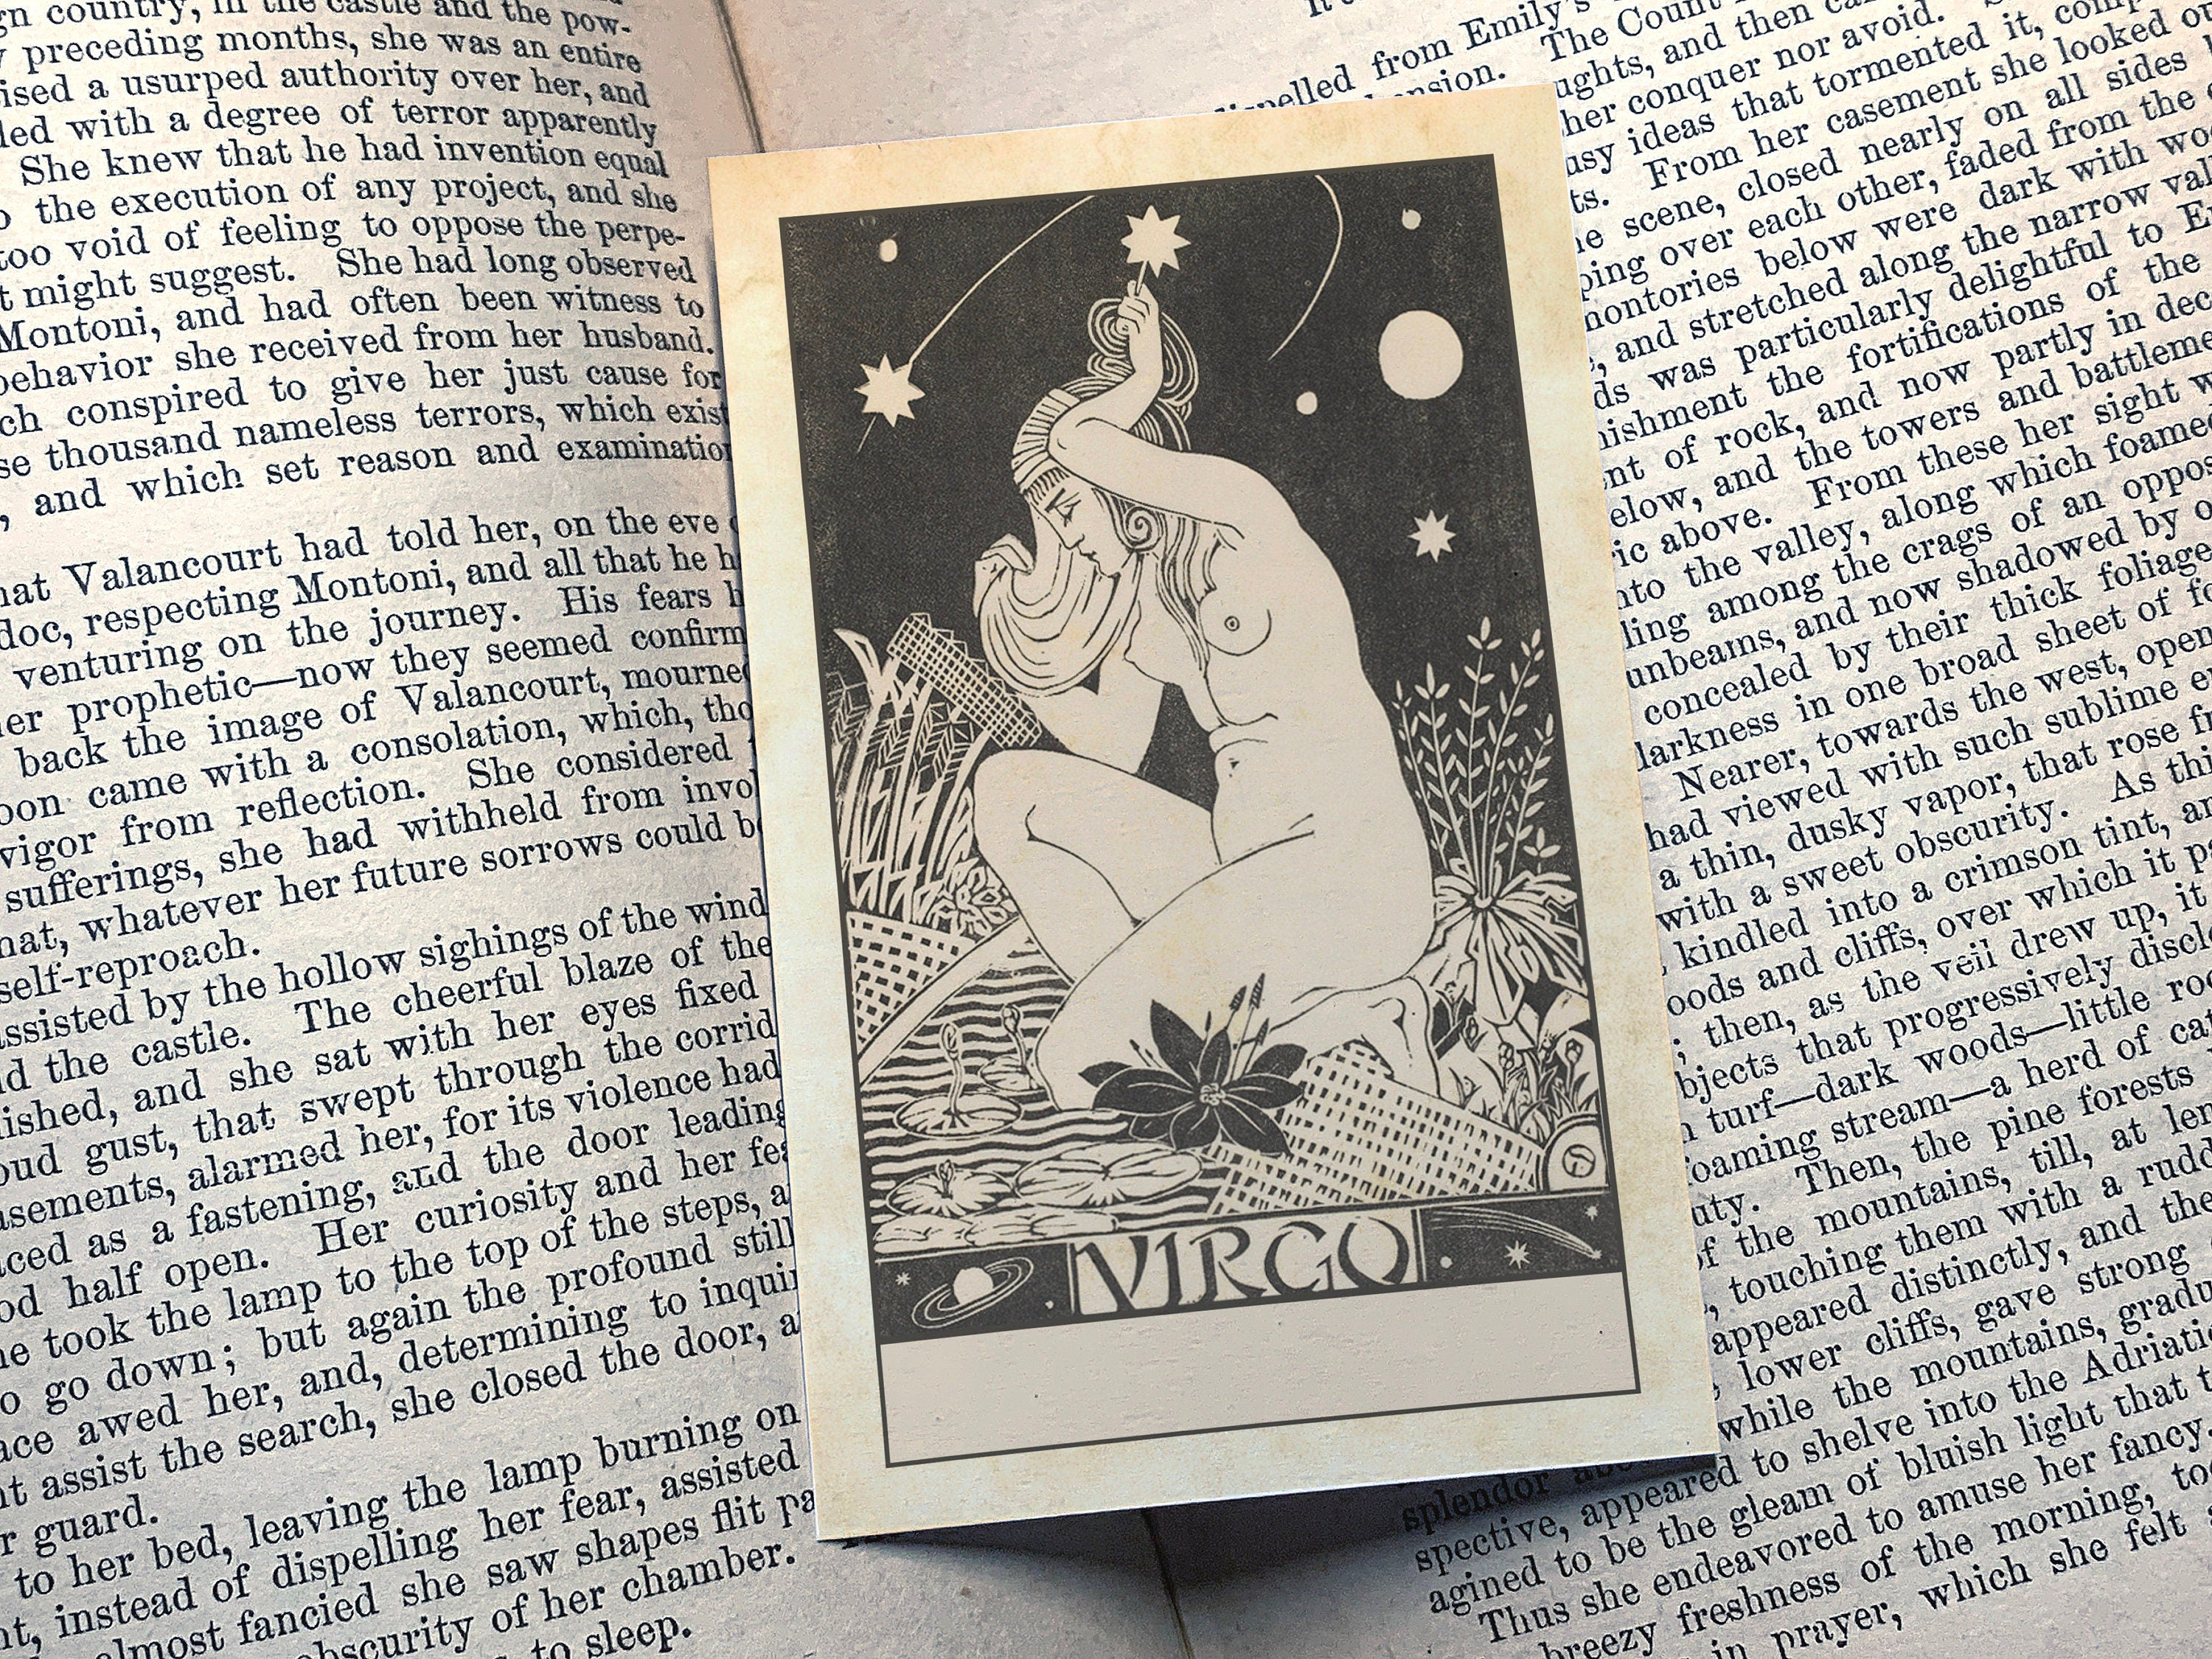 Virgo by Henri Van Der Stok, Personalized Zodiac Ex-Libris Bookplates, Crafted on Traditional Gummed Paper, 2.5in x 4in, Set of 30